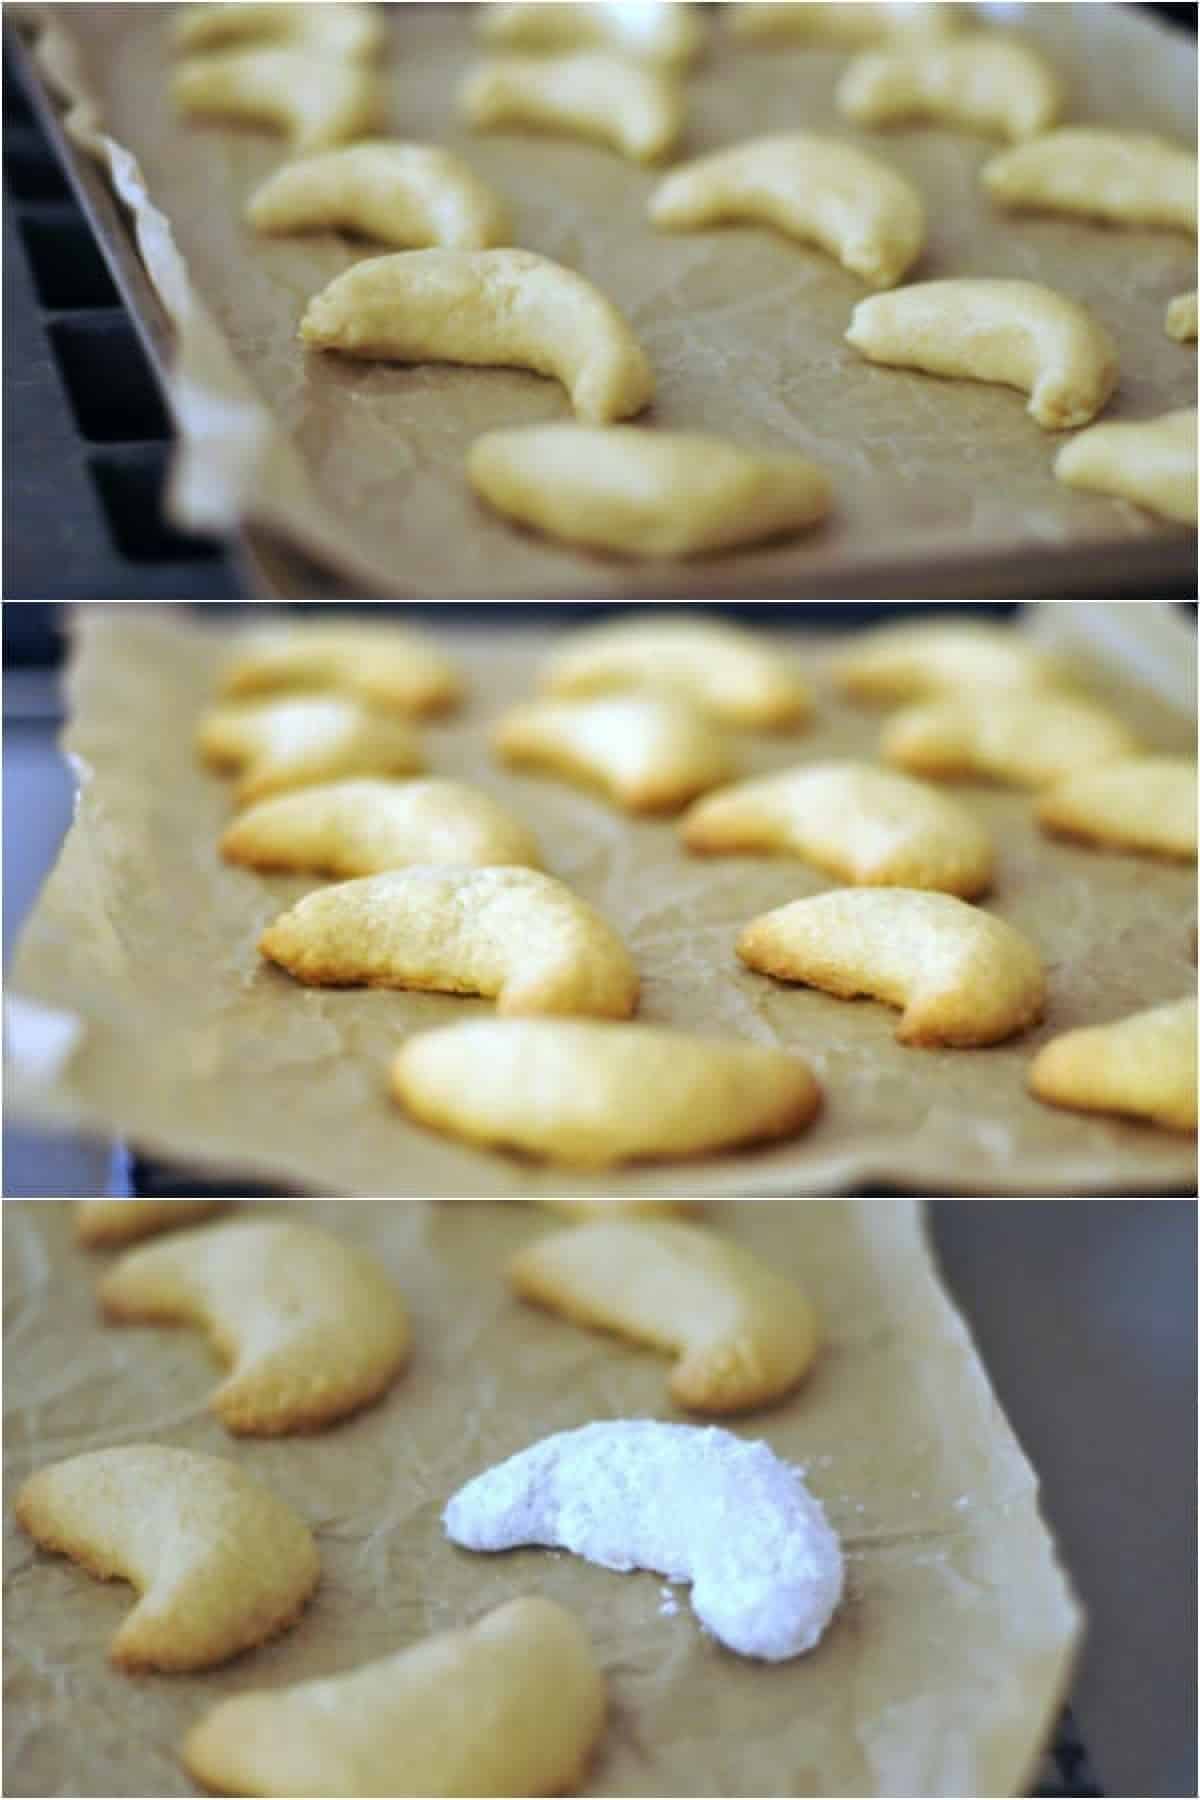 A three photo collage showing how to make crescent cookies: unbaked cookies on a parchment lined baking sheet, the cookies after baking, and cookies covered in powdered sugar.